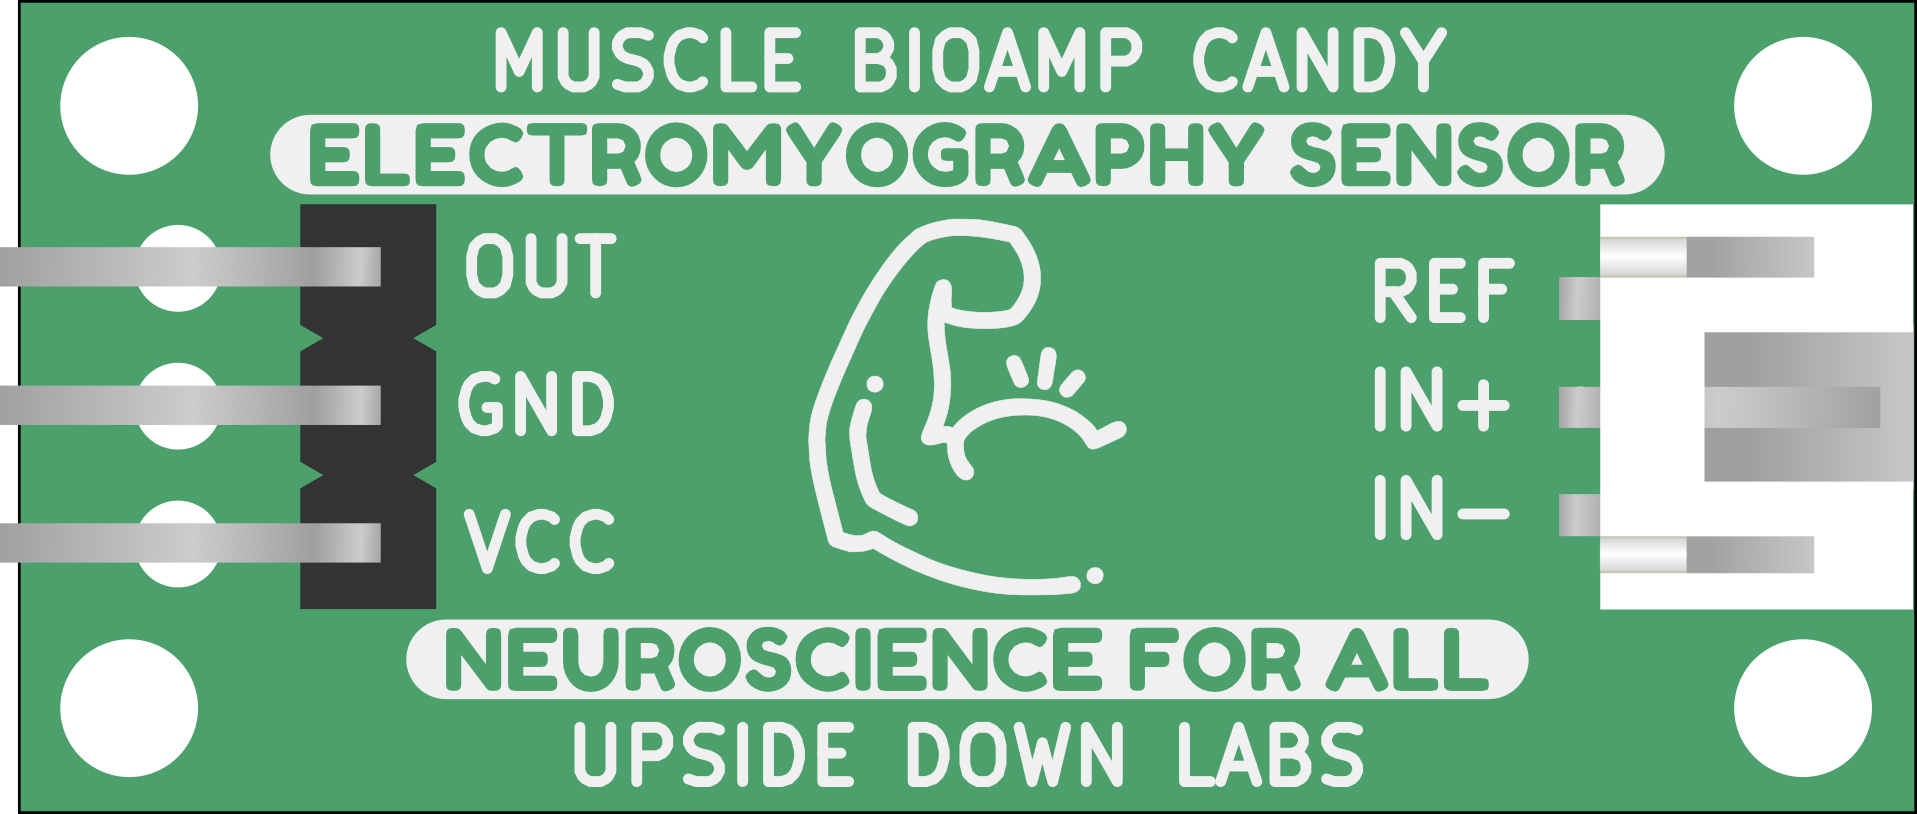 Upside Down Labs Muscle BioAmp Candy front annotated